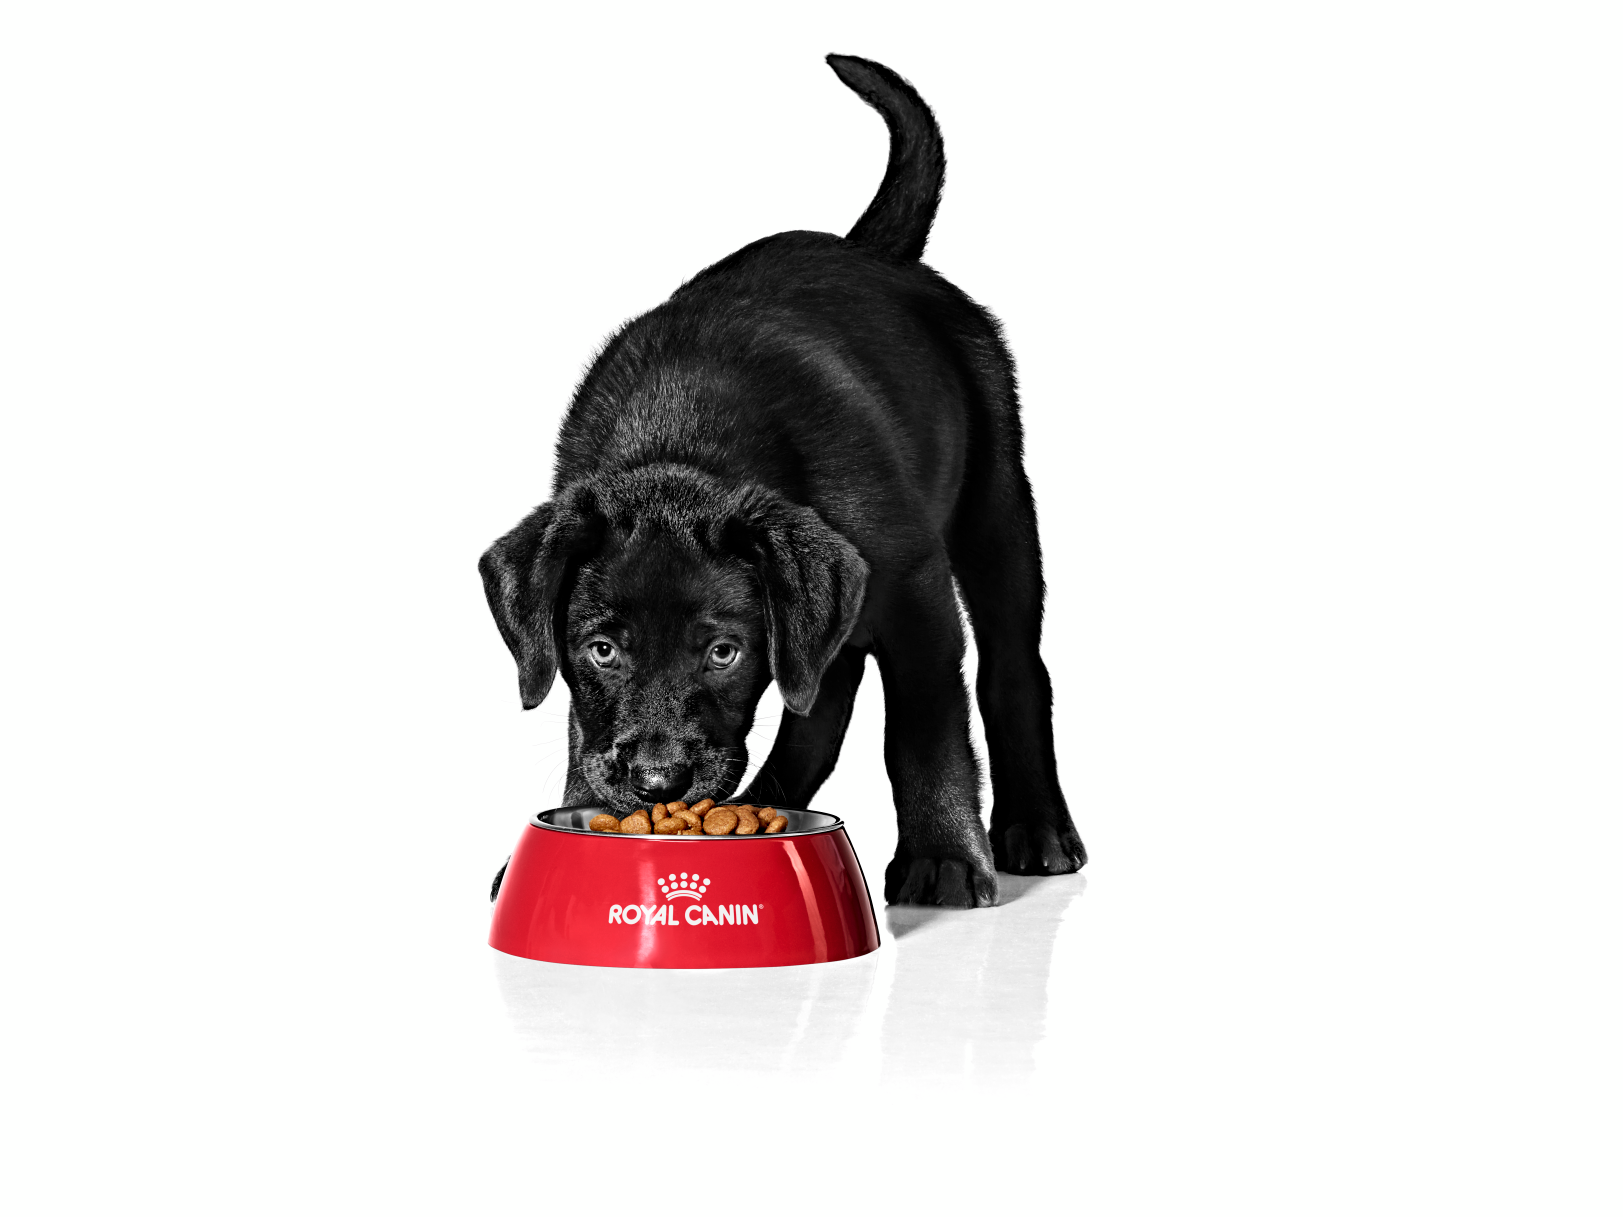 labrador puppy standing indoors eating from a red bowl